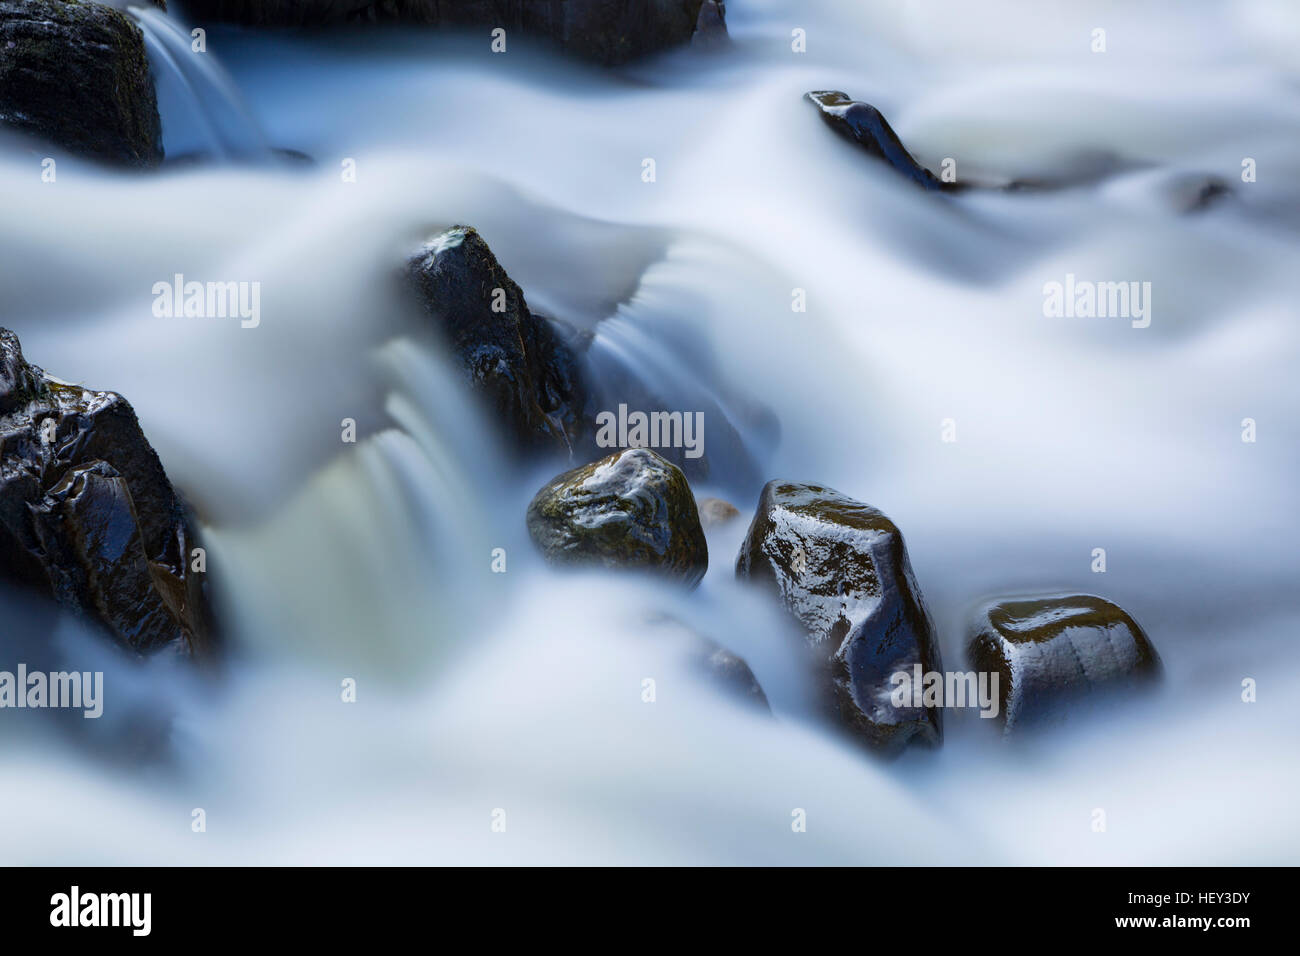 The River Braan is made silky smooth by using to a 90 second exposure to blur the water along the waterfall which accentuates the rocks. Stock Photo